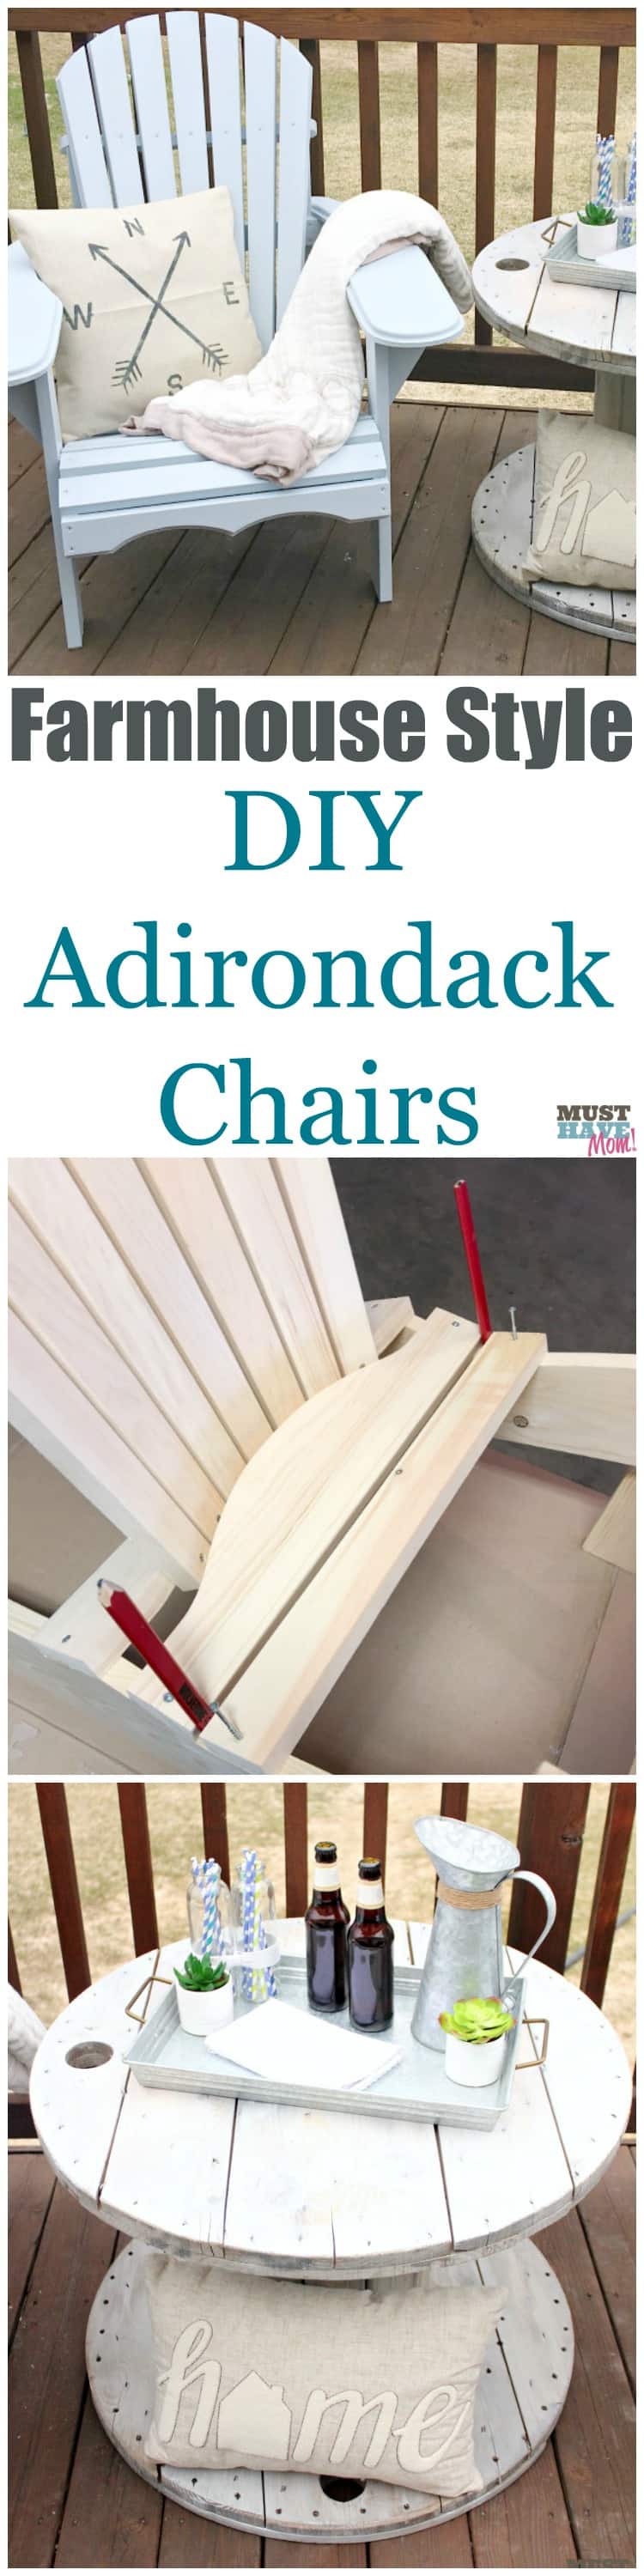 How to DIY farmhouse style adirondack chairs. Build them, paint them and style them! She shows you how. Bring farmhouse decor outdoors!